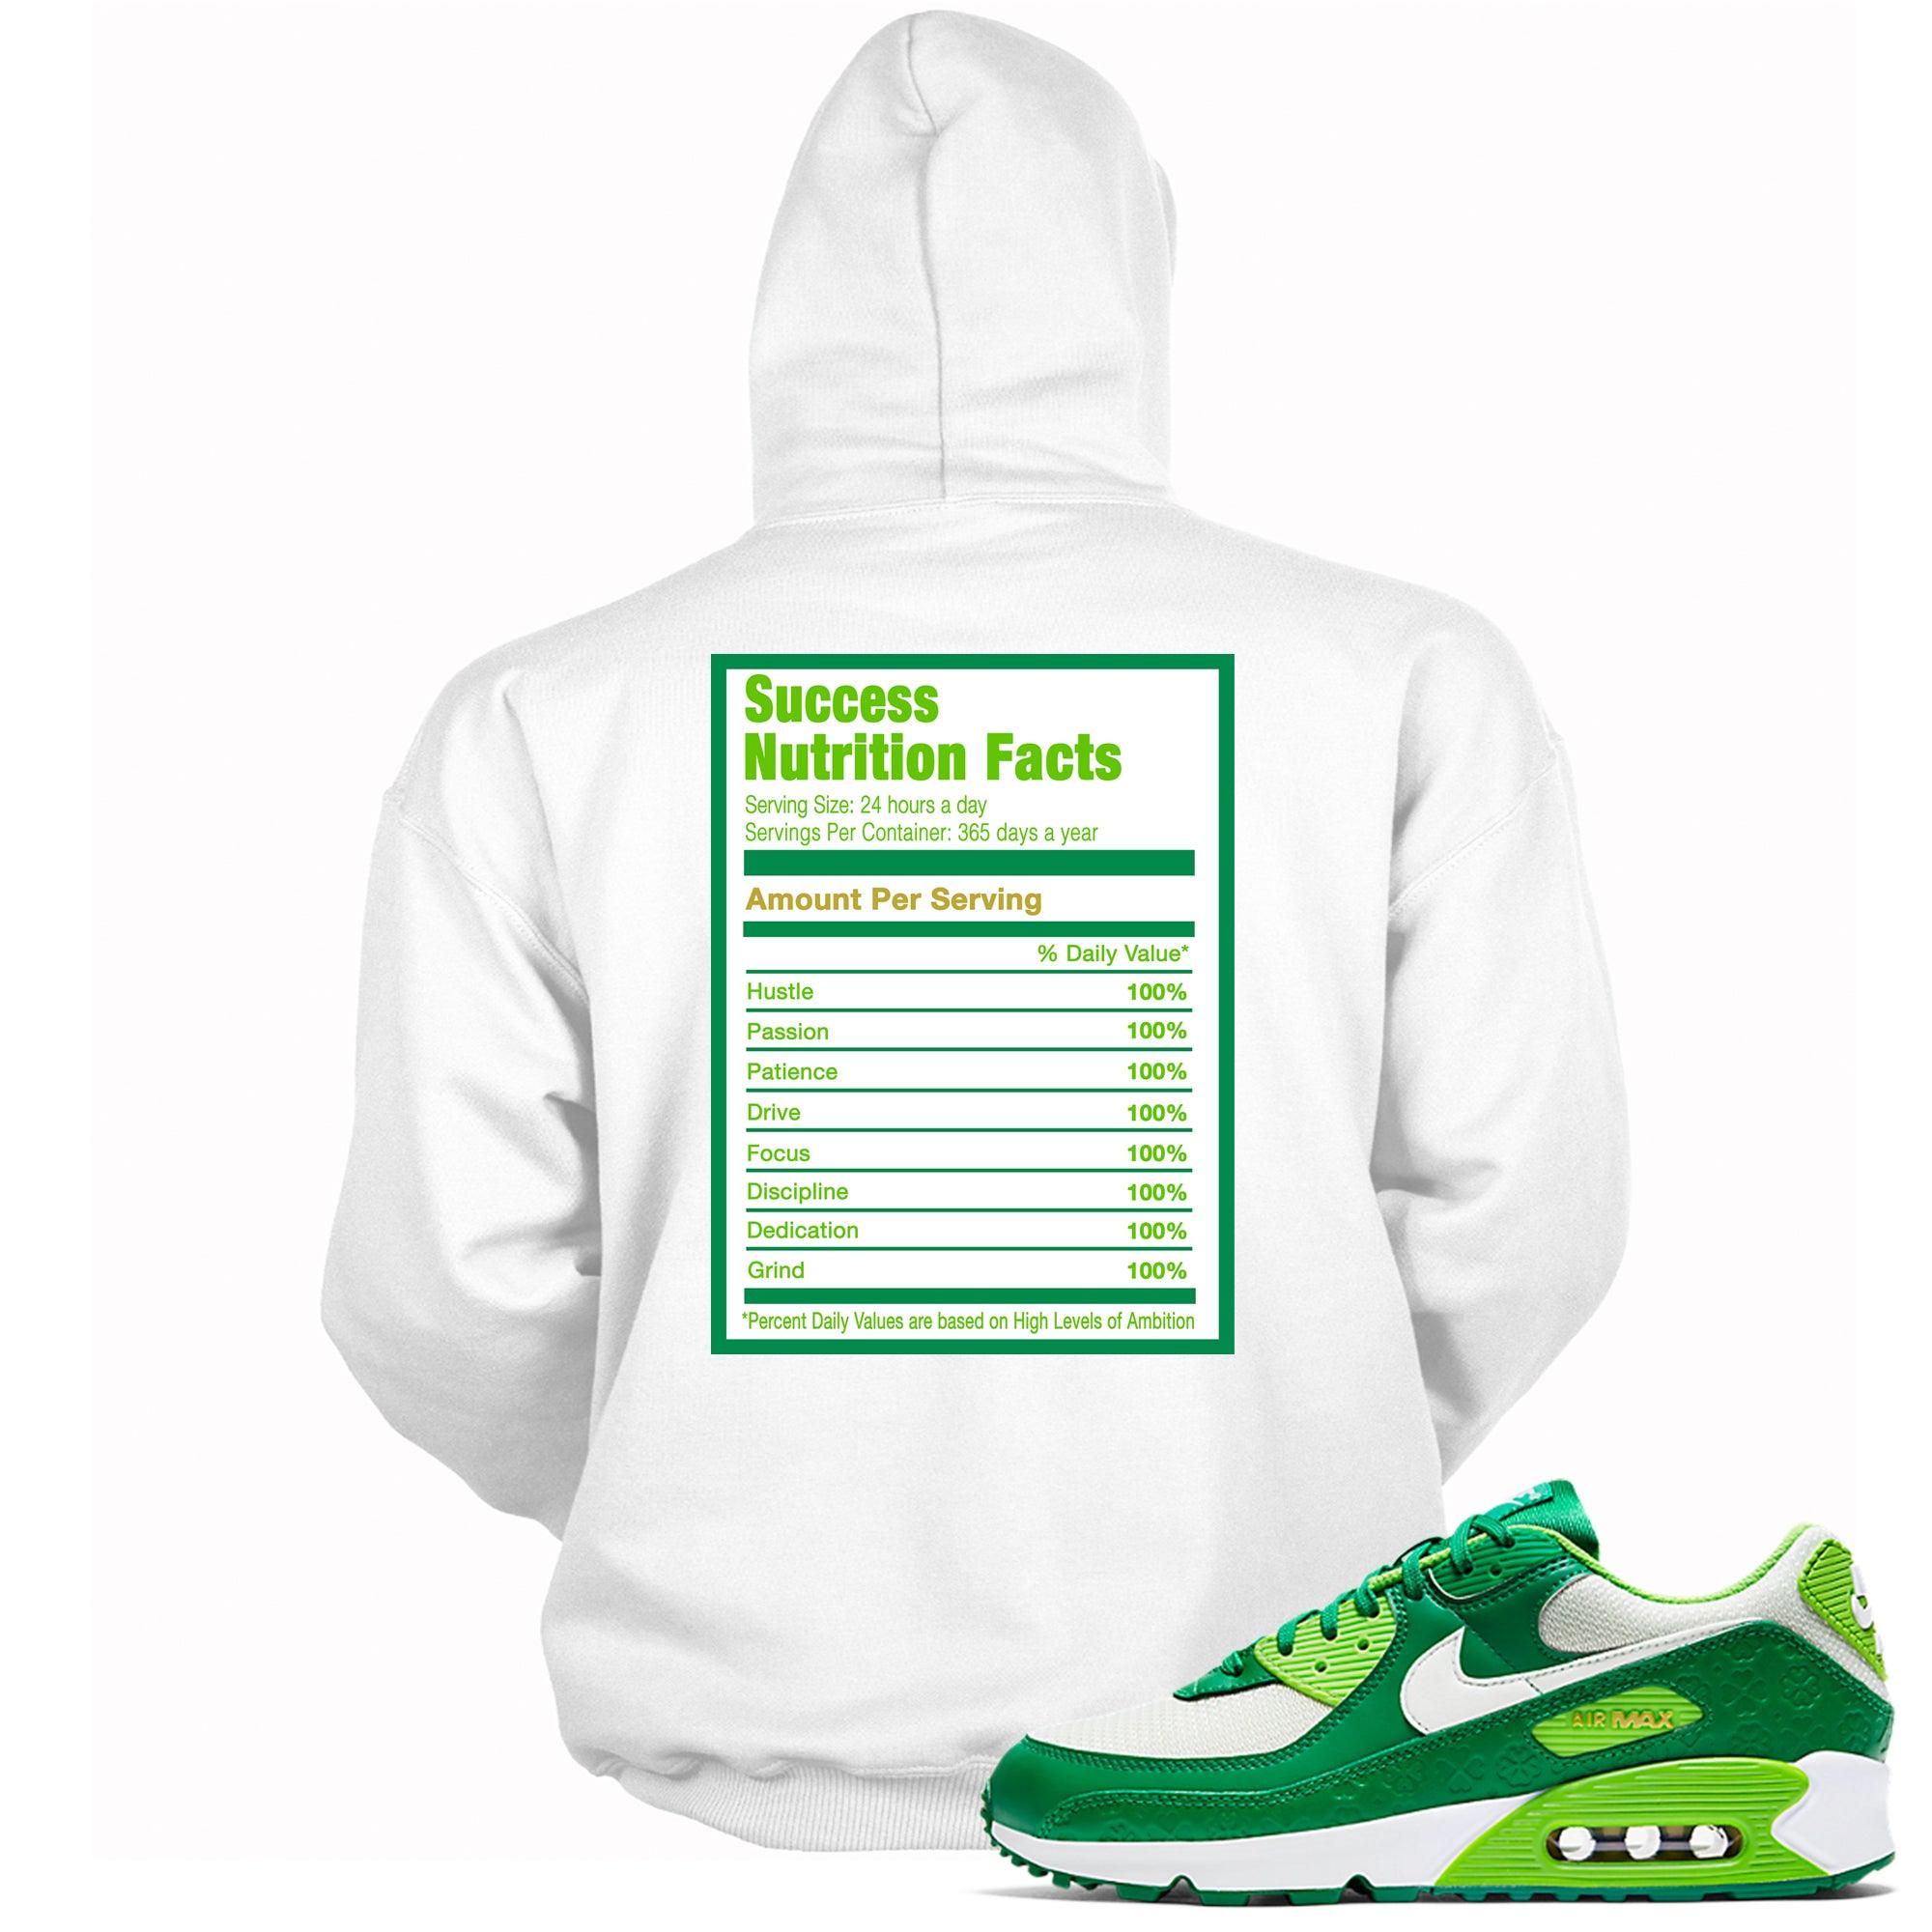 Success Nutrition Facts Hoodie Nike Air Max 90 St Patricks Day 2021 photo